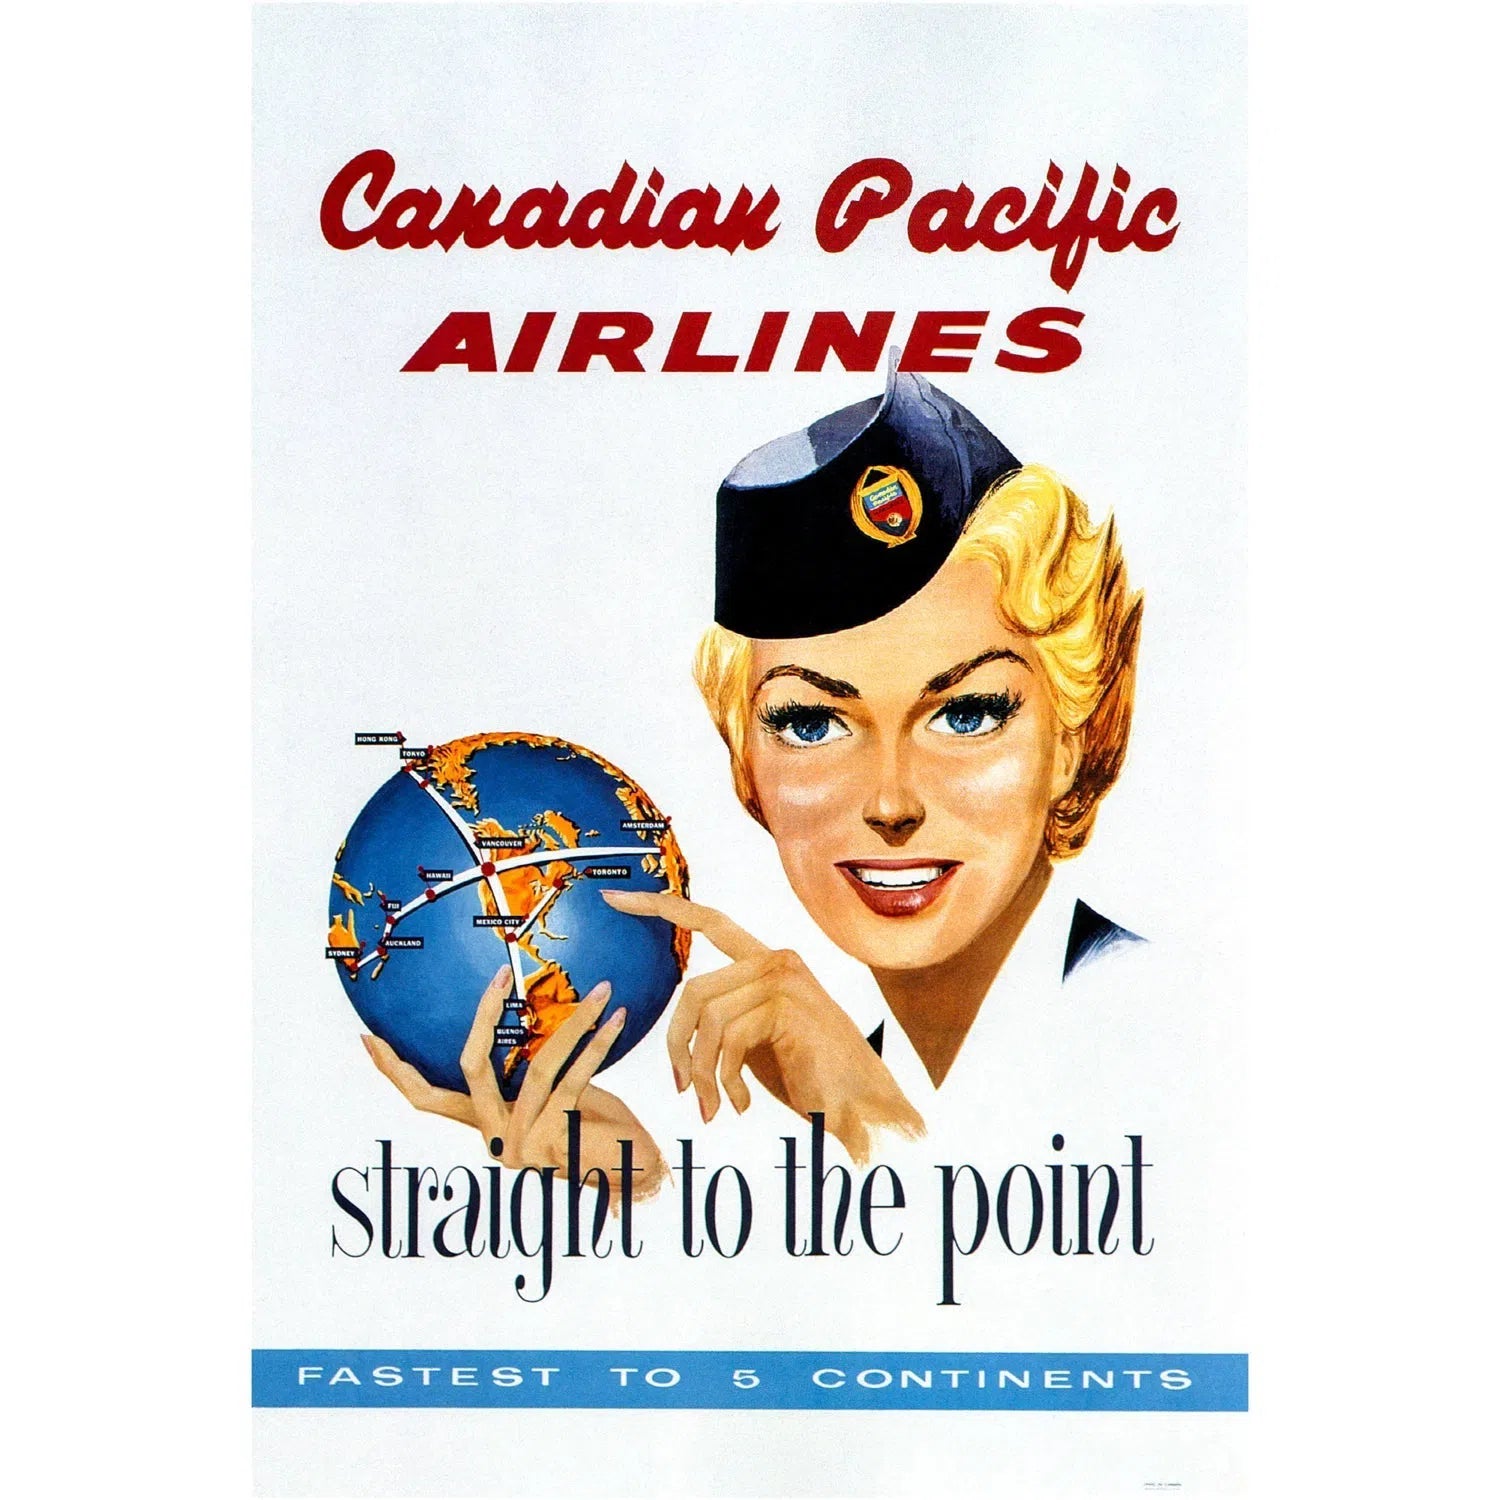 Canadian pacific airlines-Imagesdartistes